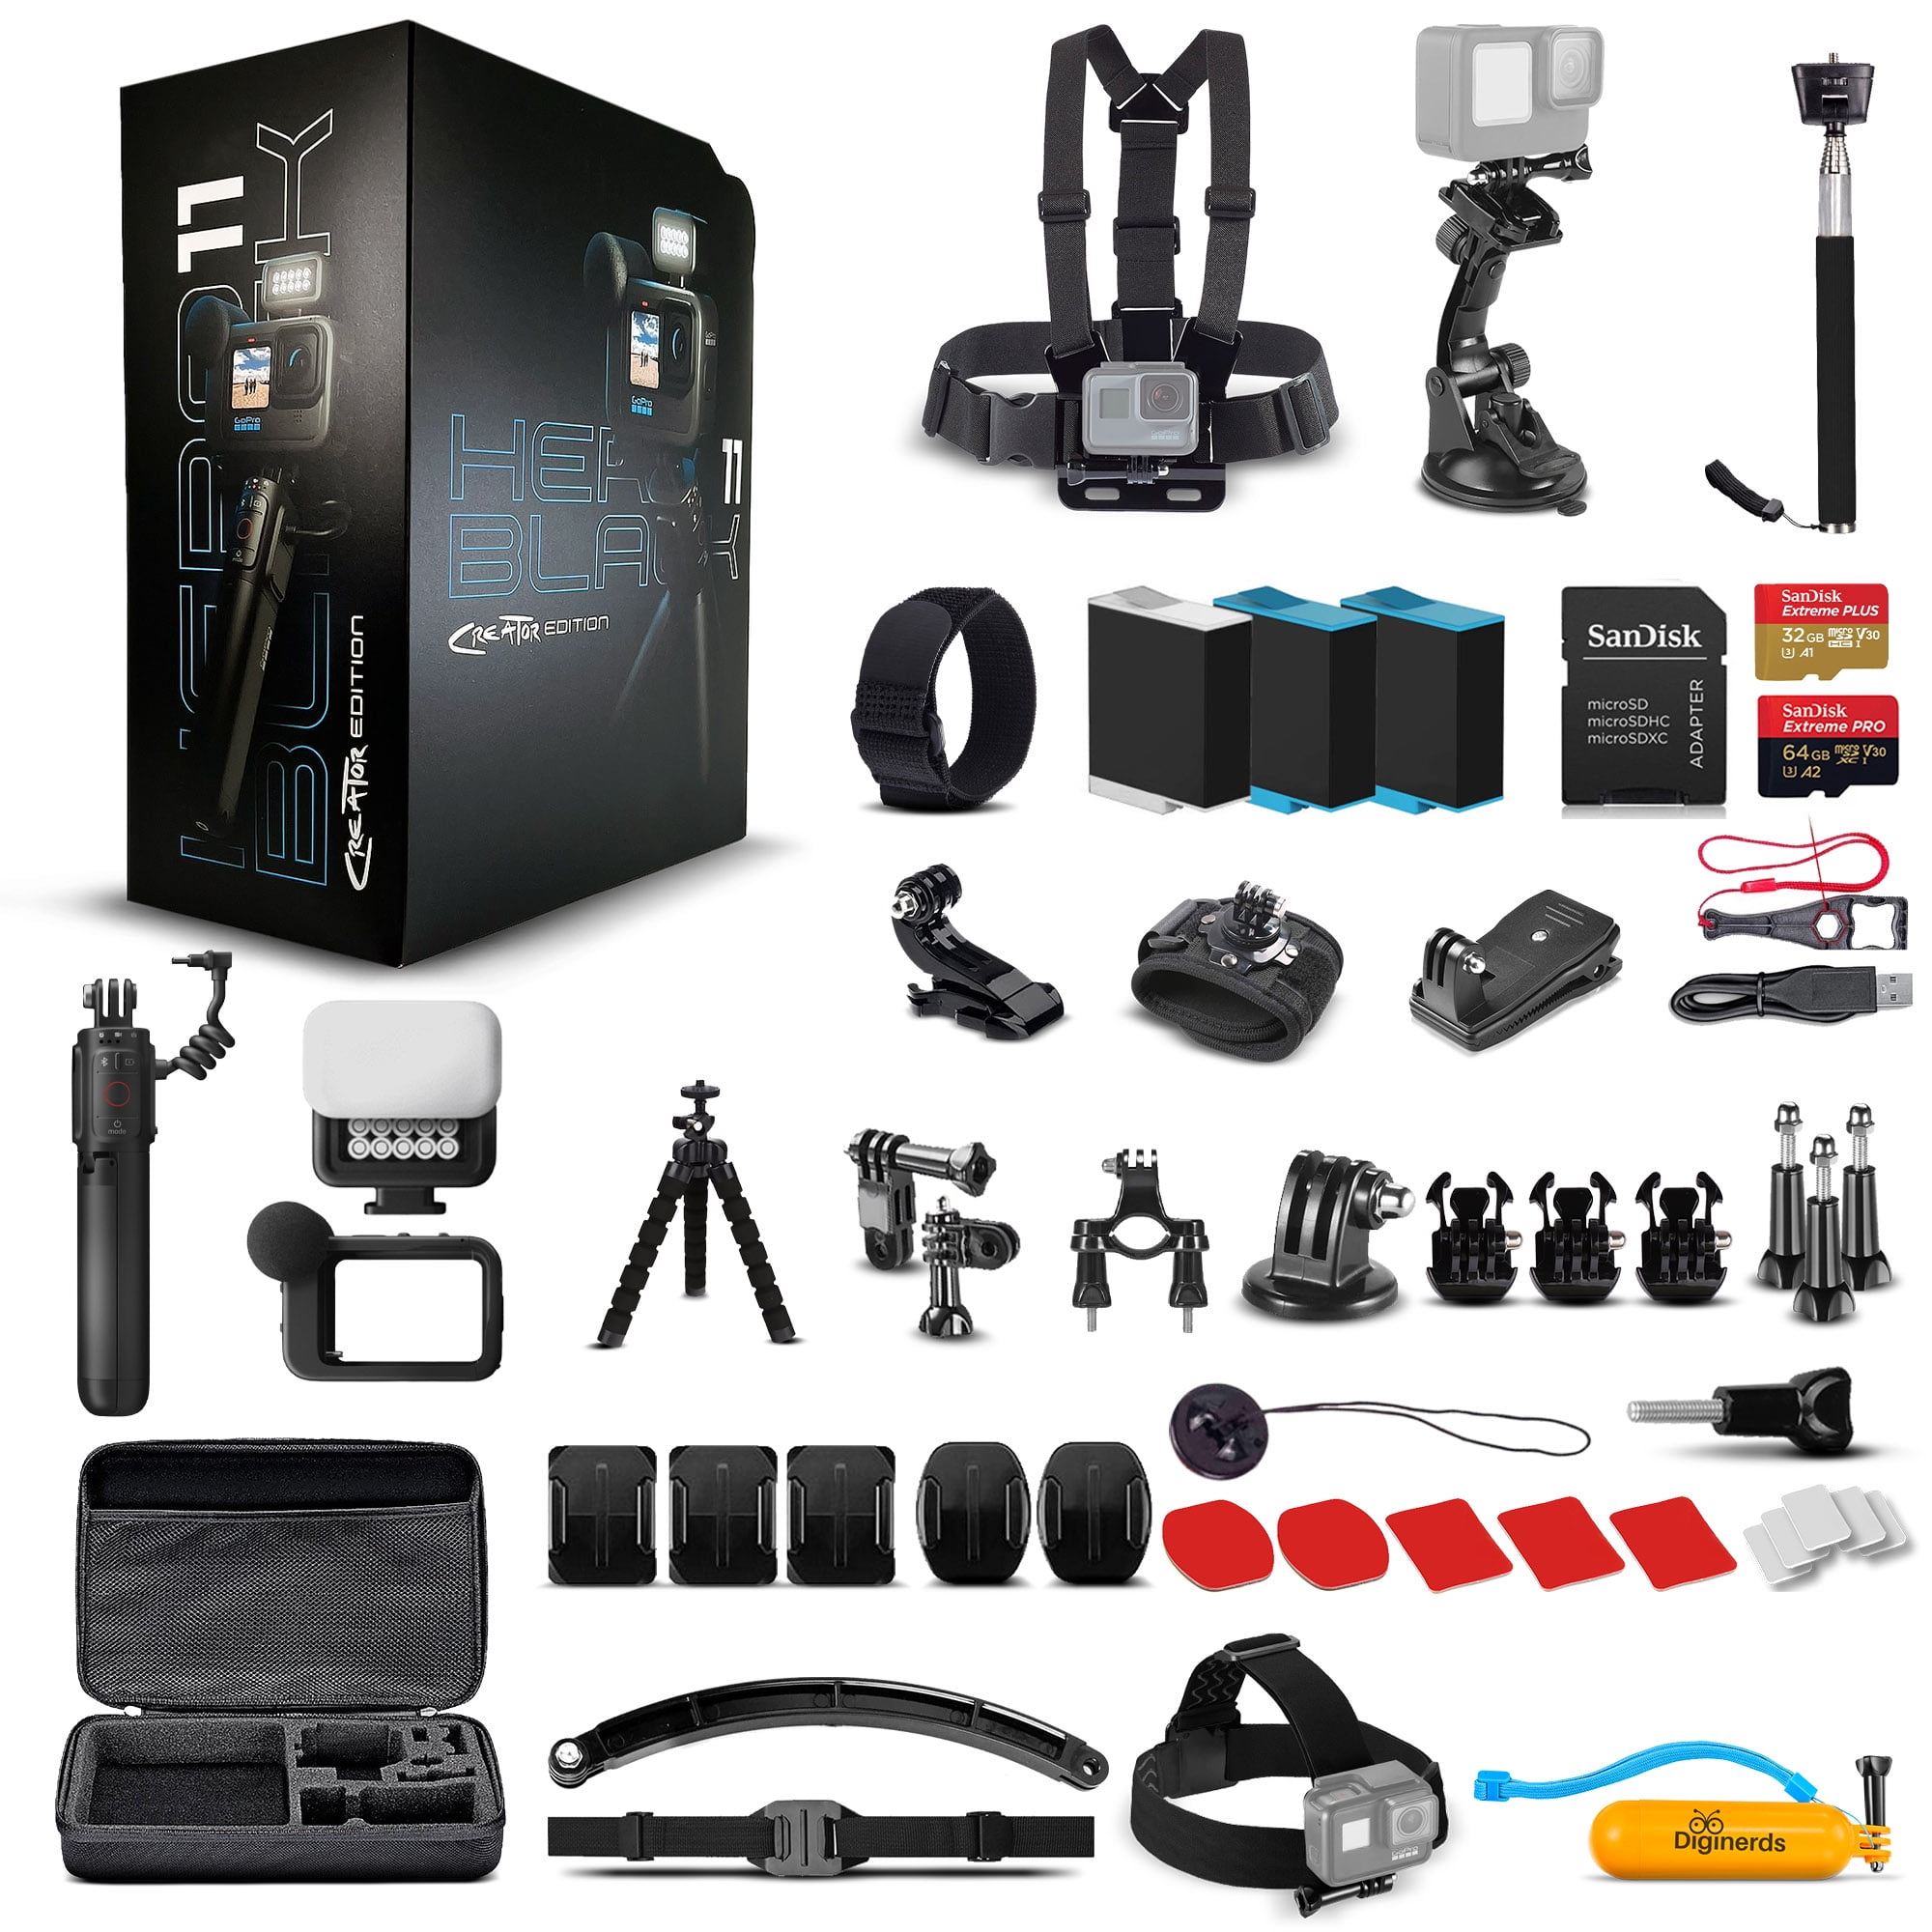 (Battery Tripod, Edition 64GB Mod, Action Piece 11) (HERO Includes Waterproof Camera and Kit 2 Accessory Mod, - Extra GoPro HERO11 + Black Batteries Remote), - Creator Light Grip, Volta Card, Media 50